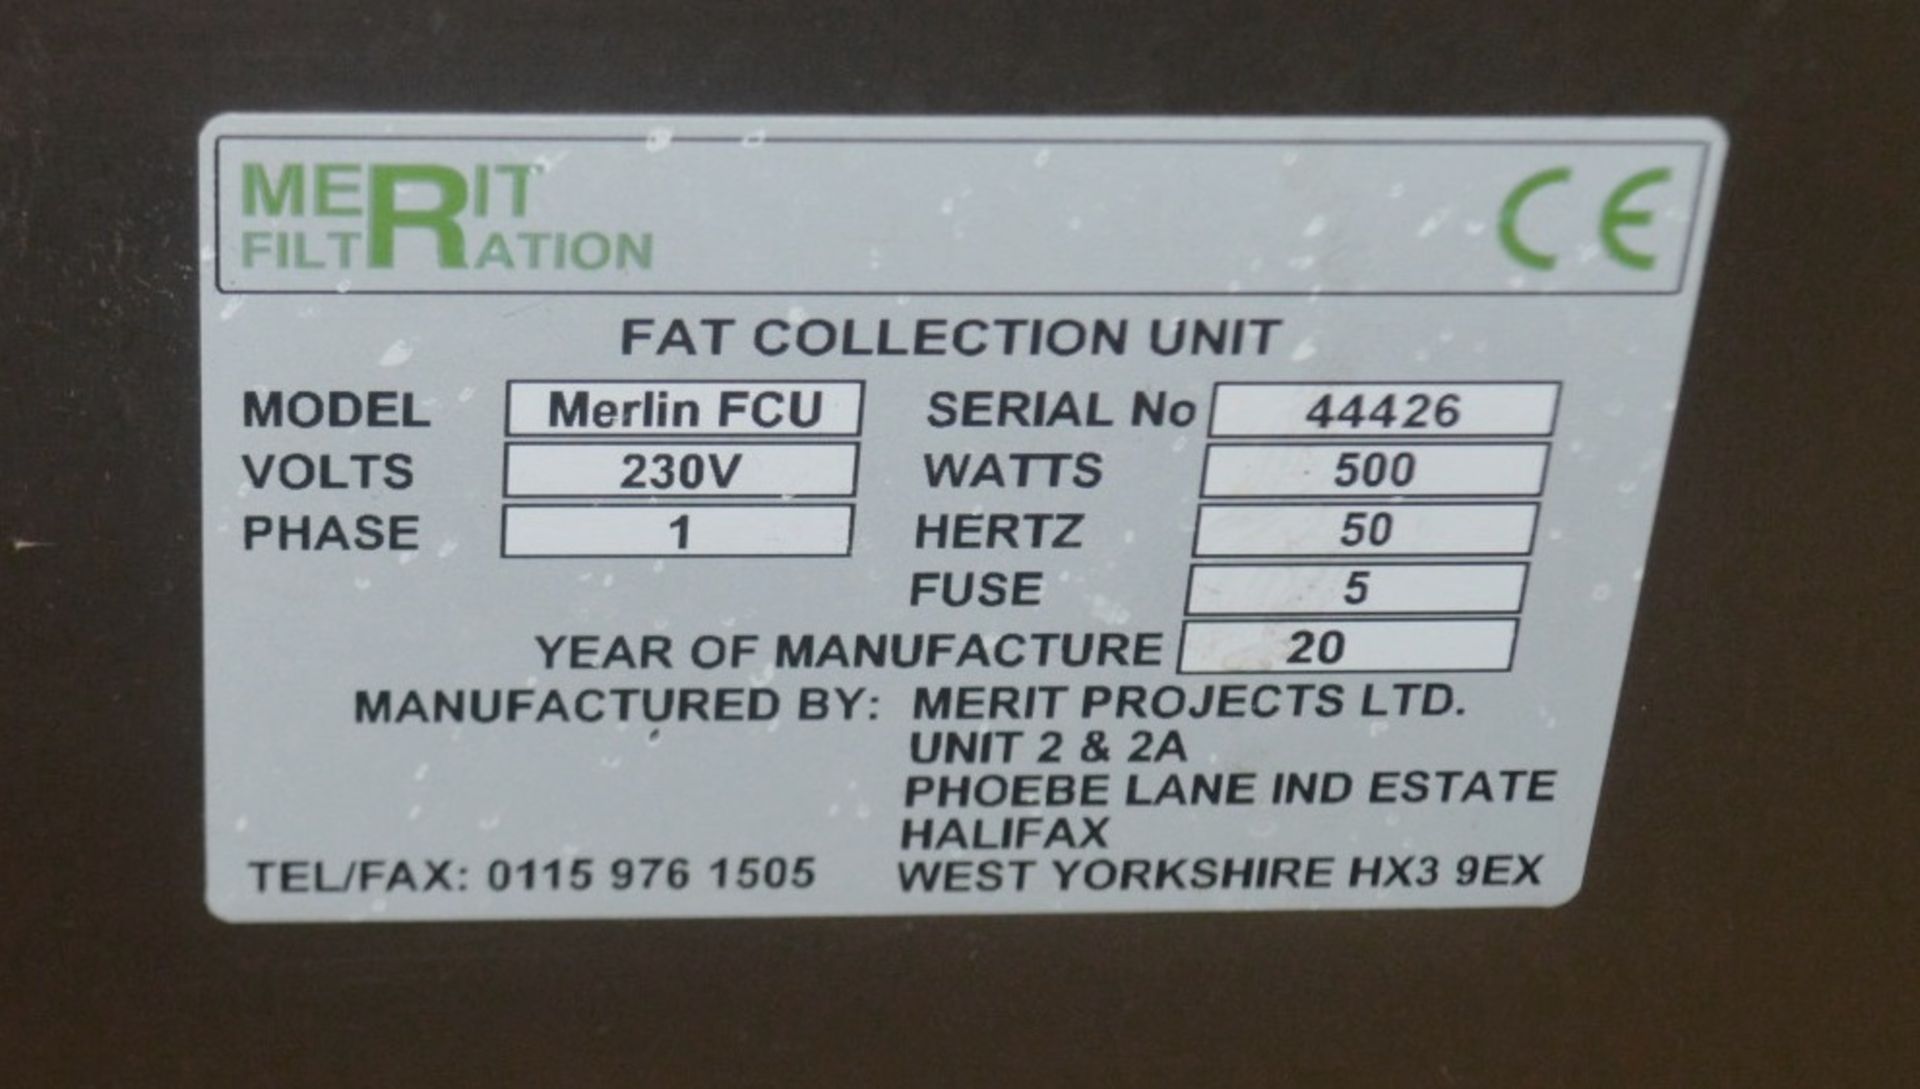 1 x MERLIN Commercial Kitchen Fat Collection Unit - Dimensions: H80 x W40 x D56cm - Very Recently - Image 5 of 9